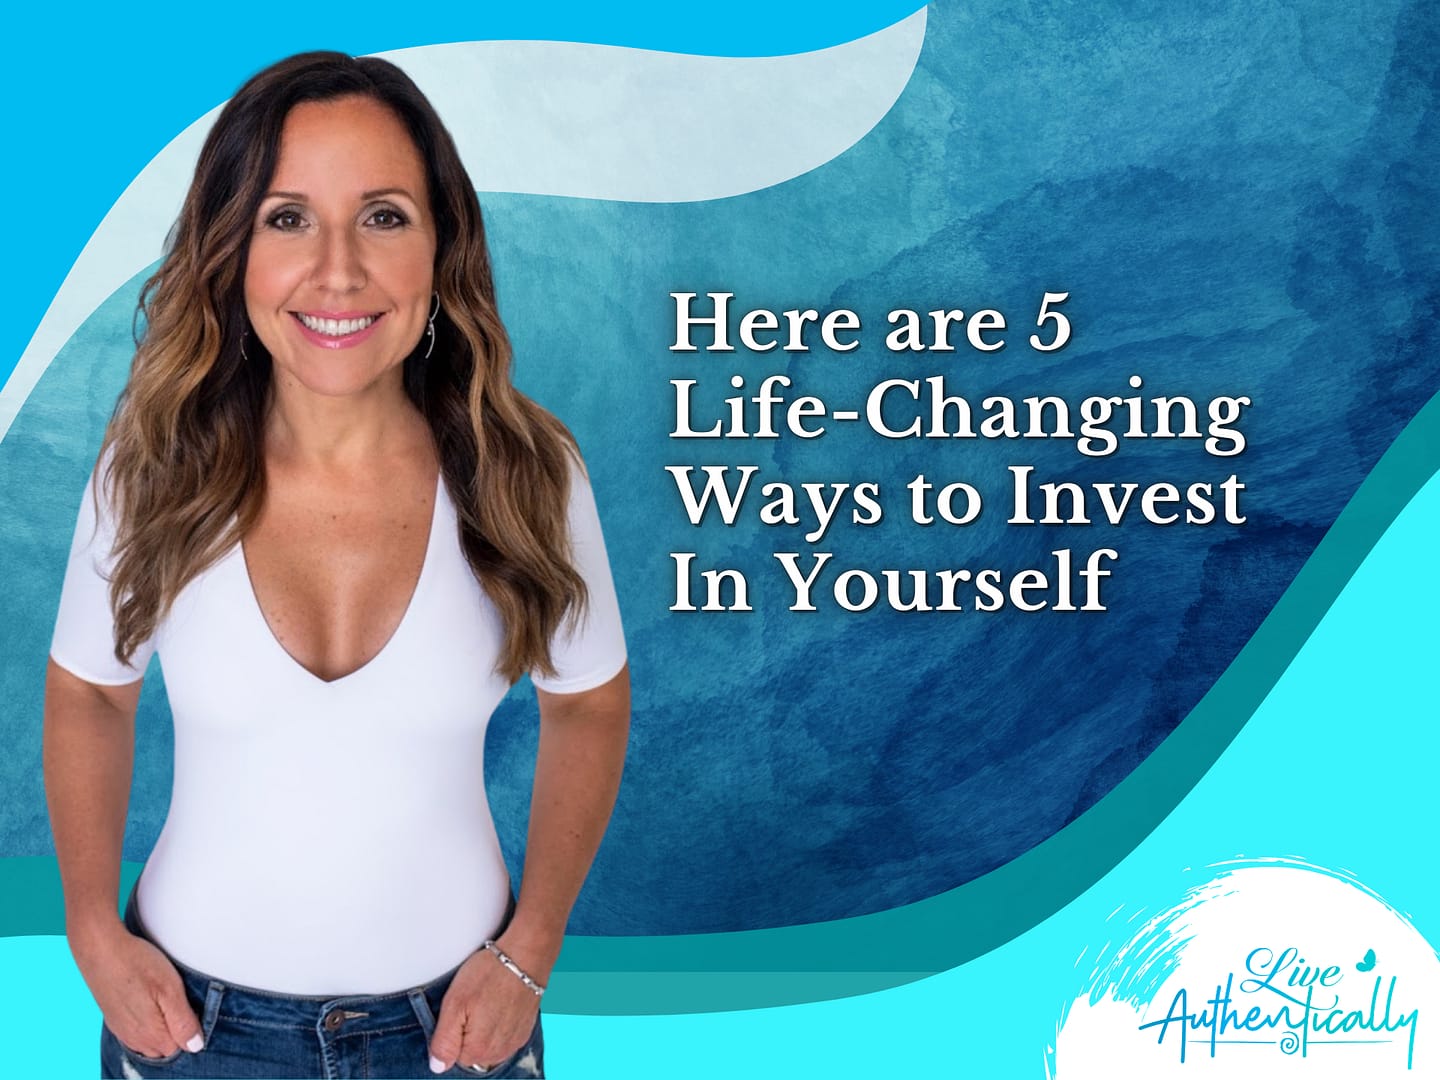 5 Life-Changing Ways to Invest In Yourself